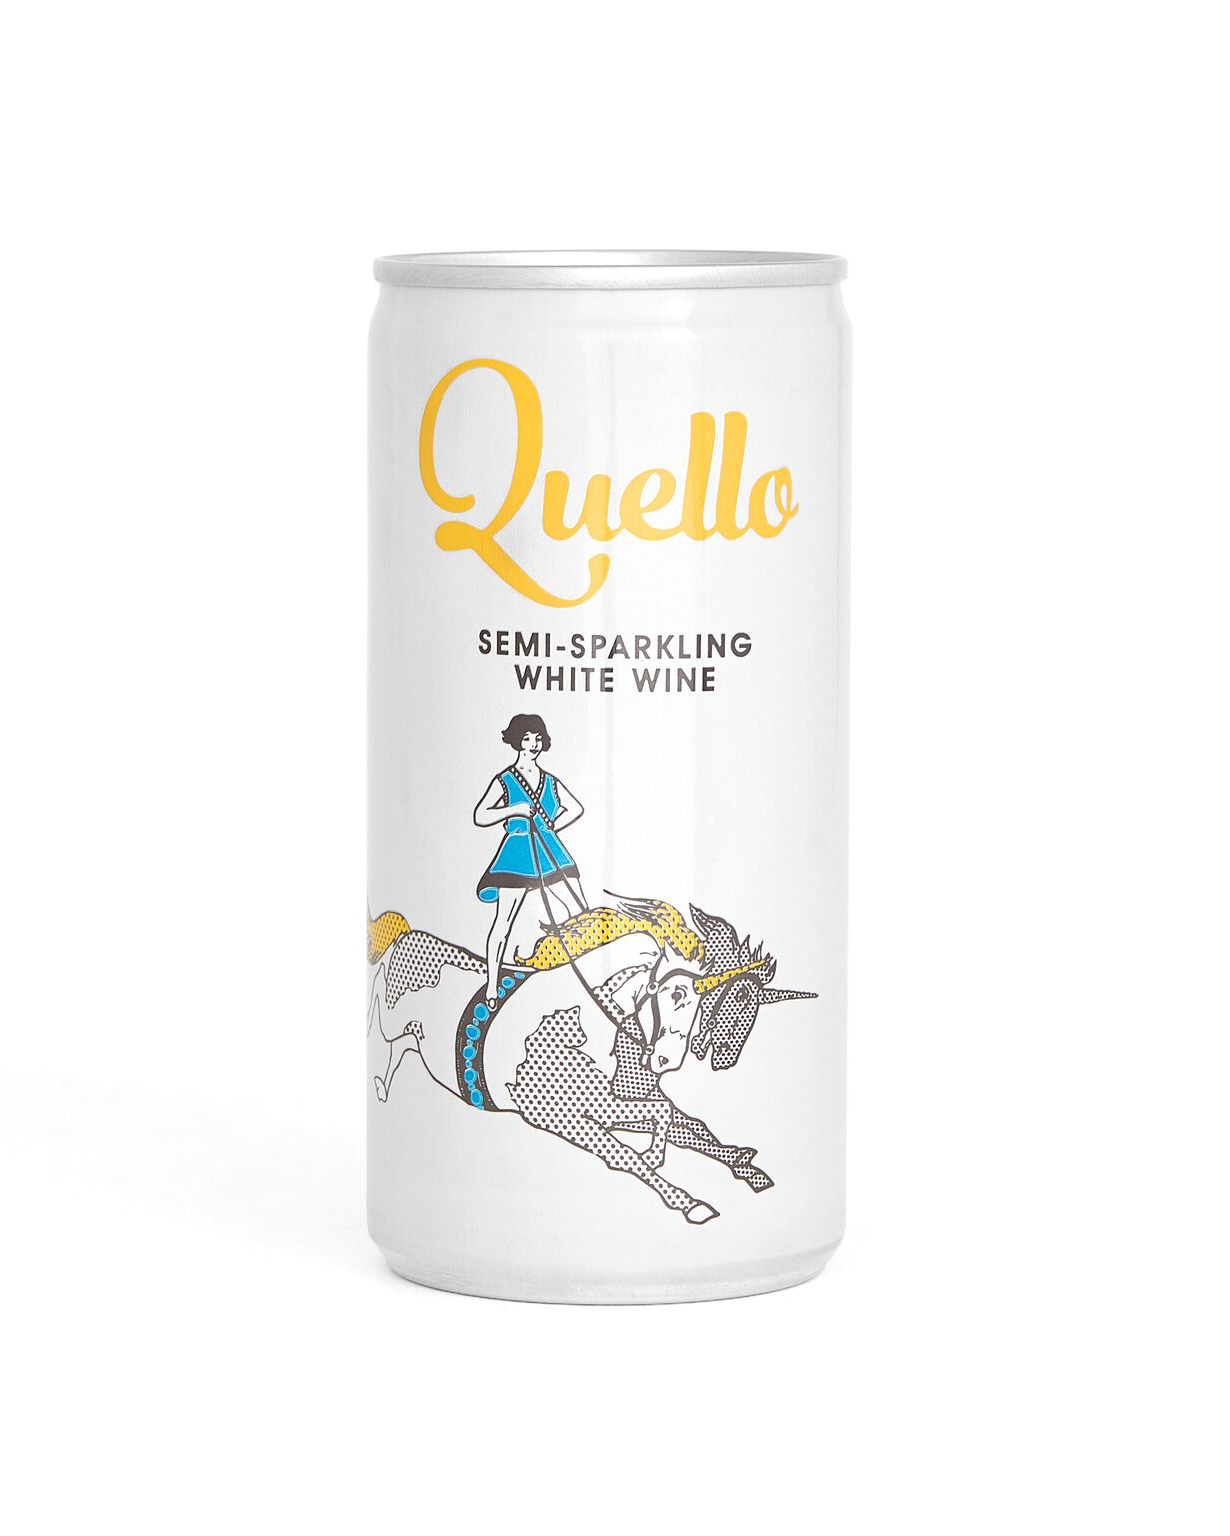 quello wine packshot photography SHED London